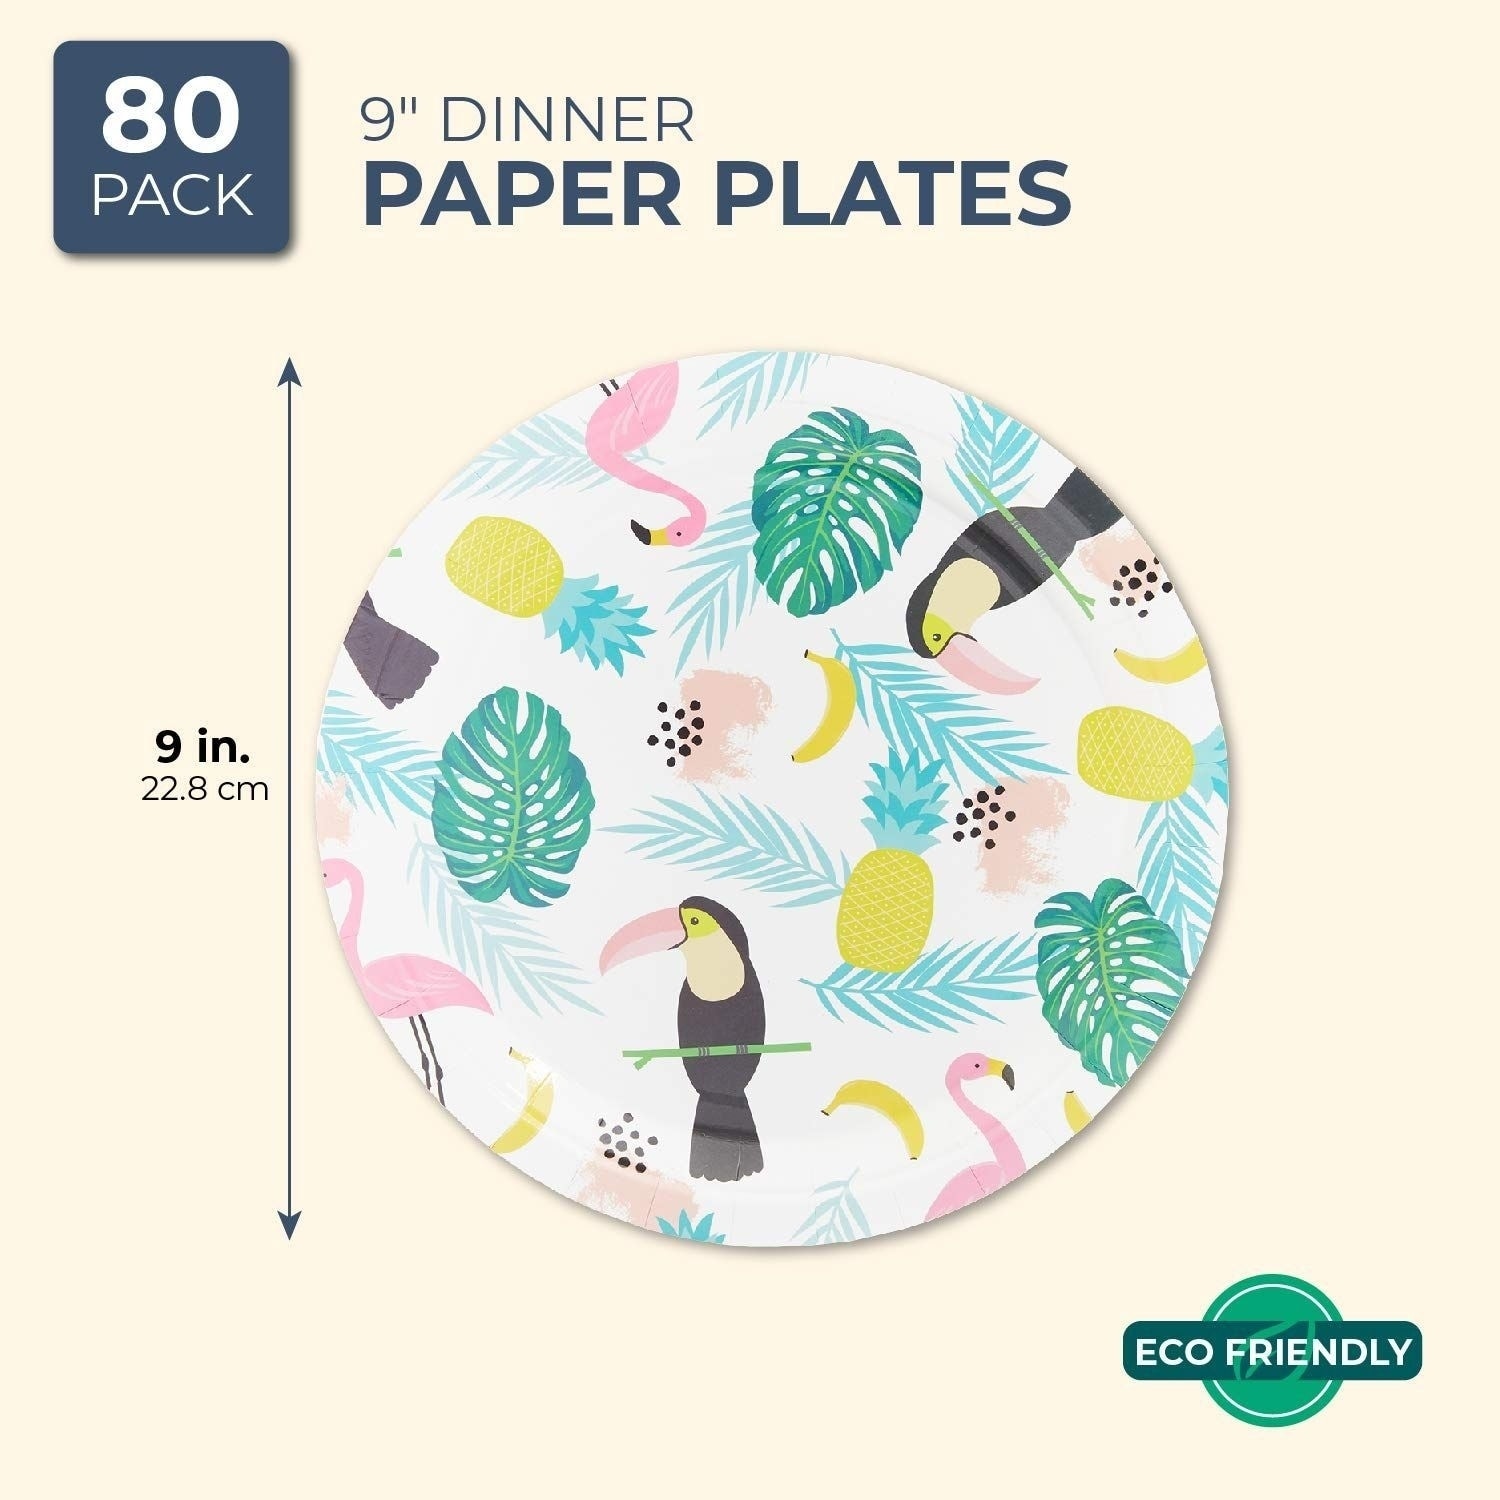 https://ak1.ostkcdn.com/images/products/31094282/80-Pack-Tropical-Themed-Party-Disposable-Paper-Plates-9-for-Birthday-Party-ad419e87-b45d-4a1f-ab72-da2f69e40f98.jpg